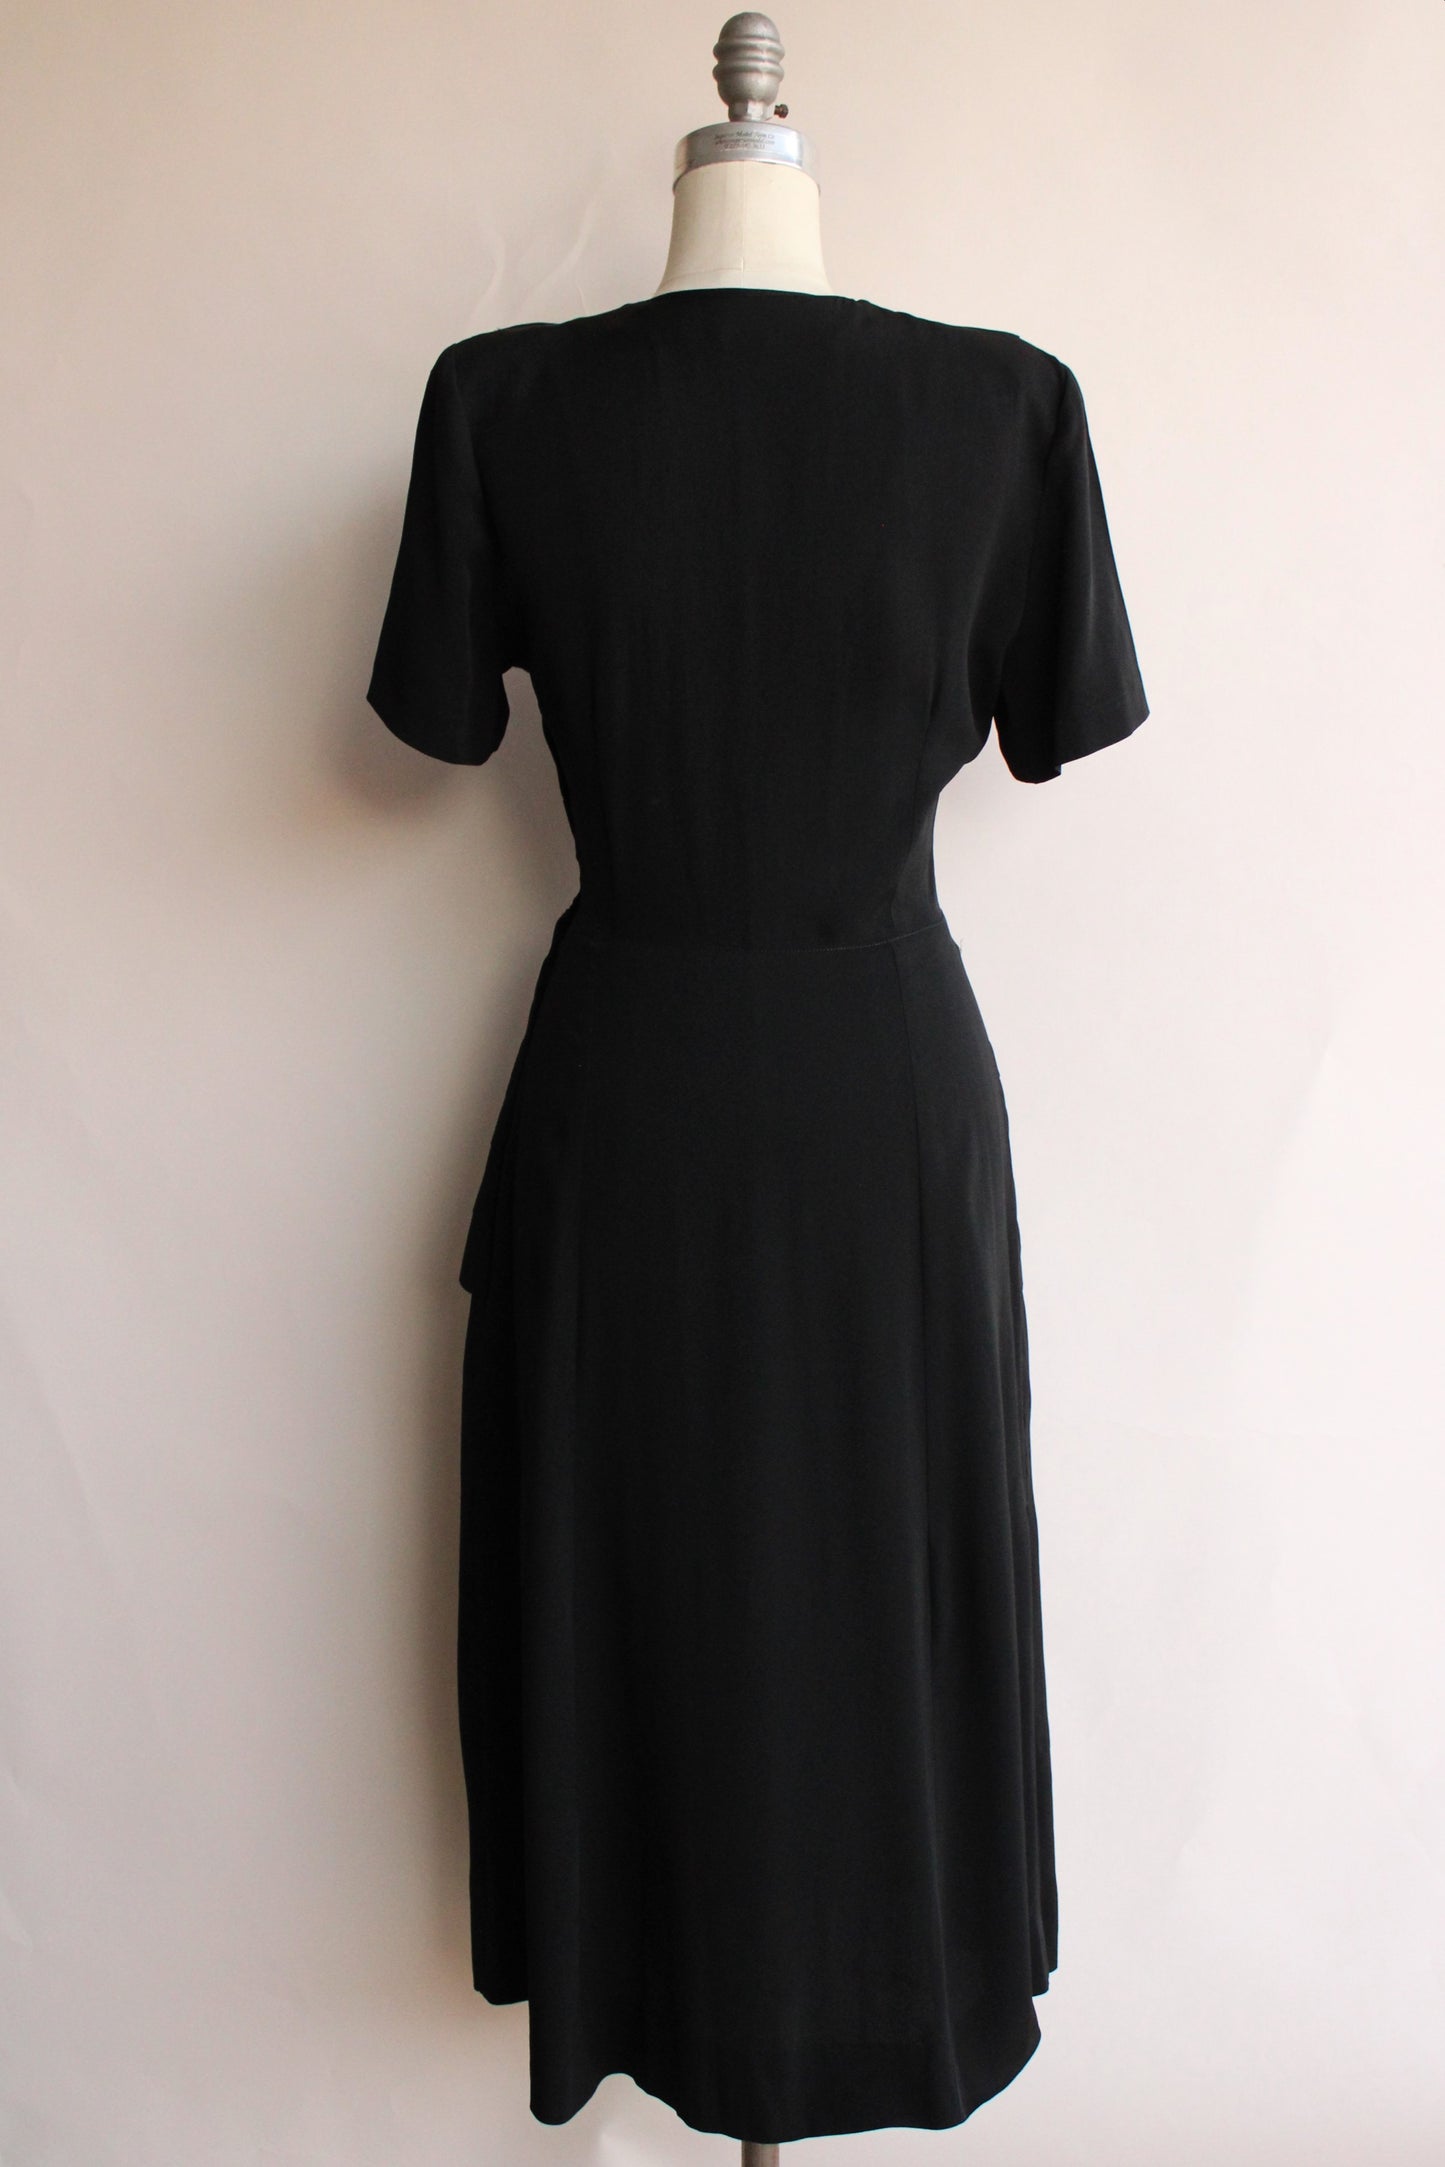 Vintage 1940s Black Rayon Dress With Square Shawl Collar